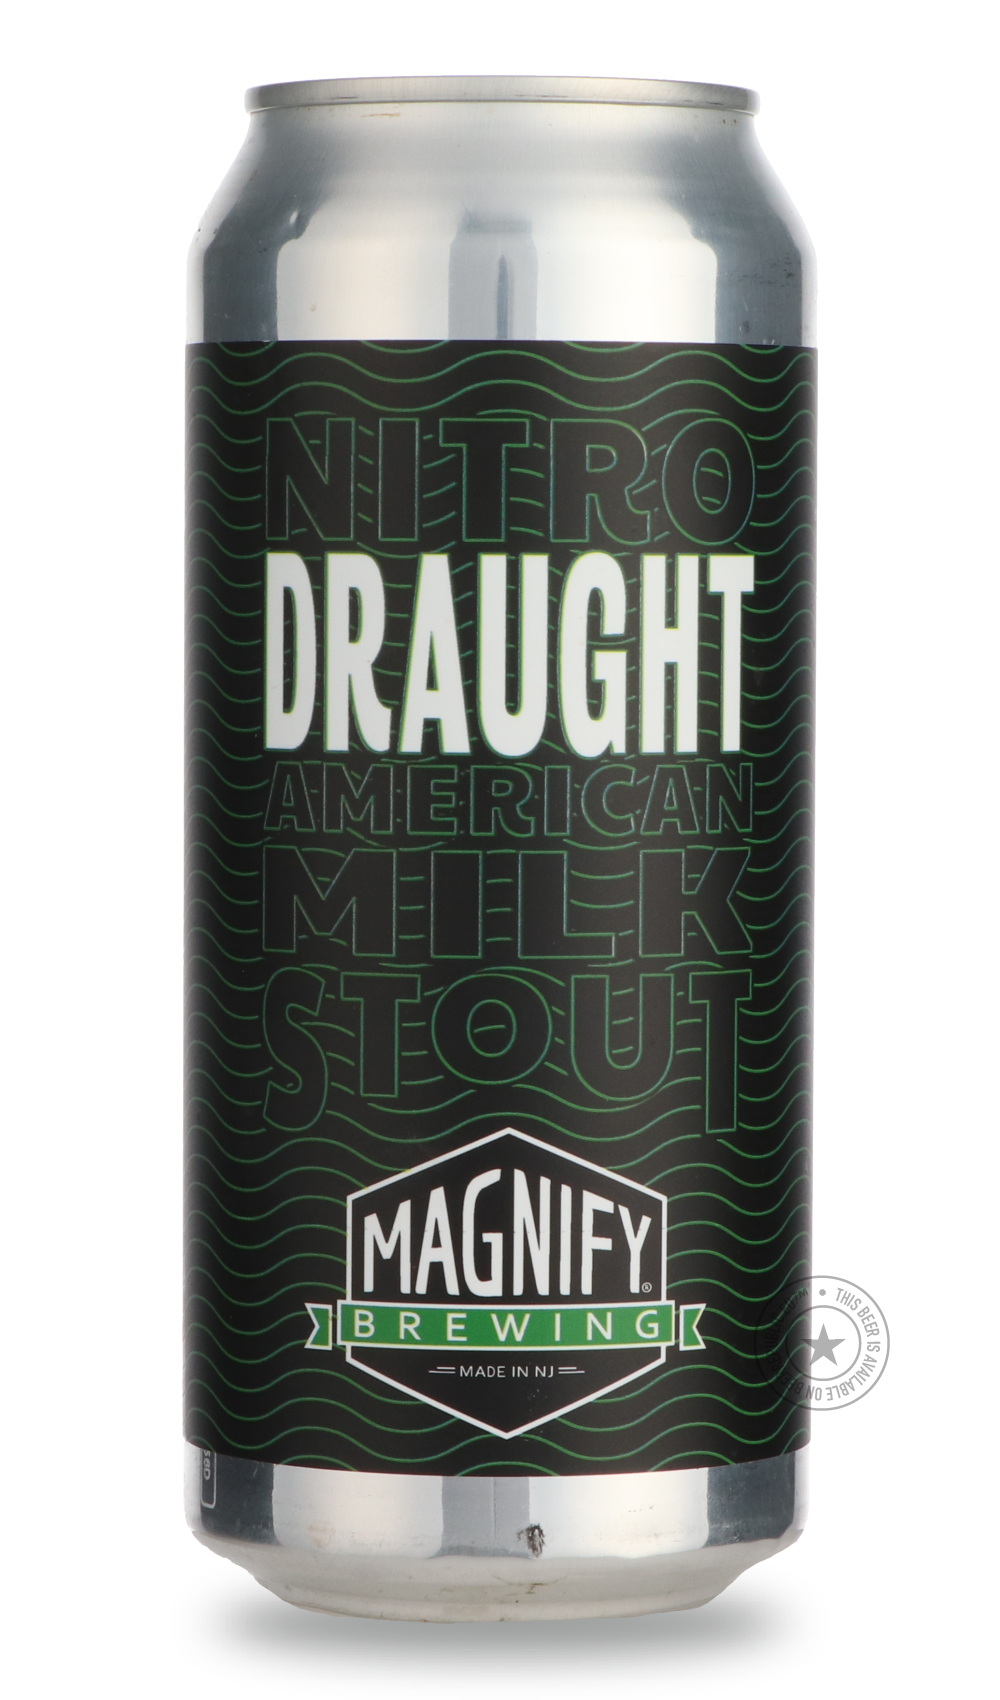 -Magnify- Draught-Stout & Porter- Only @ Beer Republic - The best online beer store for American & Canadian craft beer - Buy beer online from the USA and Canada - Bier online kopen - Amerikaans bier kopen - Craft beer store - Craft beer kopen - Amerikanisch bier kaufen - Bier online kaufen - Acheter biere online - IPA - Stout - Porter - New England IPA - Hazy IPA - Imperial Stout - Barrel Aged - Barrel Aged Imperial Stout - Brown - Dark beer - Blond - Blonde - Pilsner - Lager - Wheat - Weizen - Amber - Barl